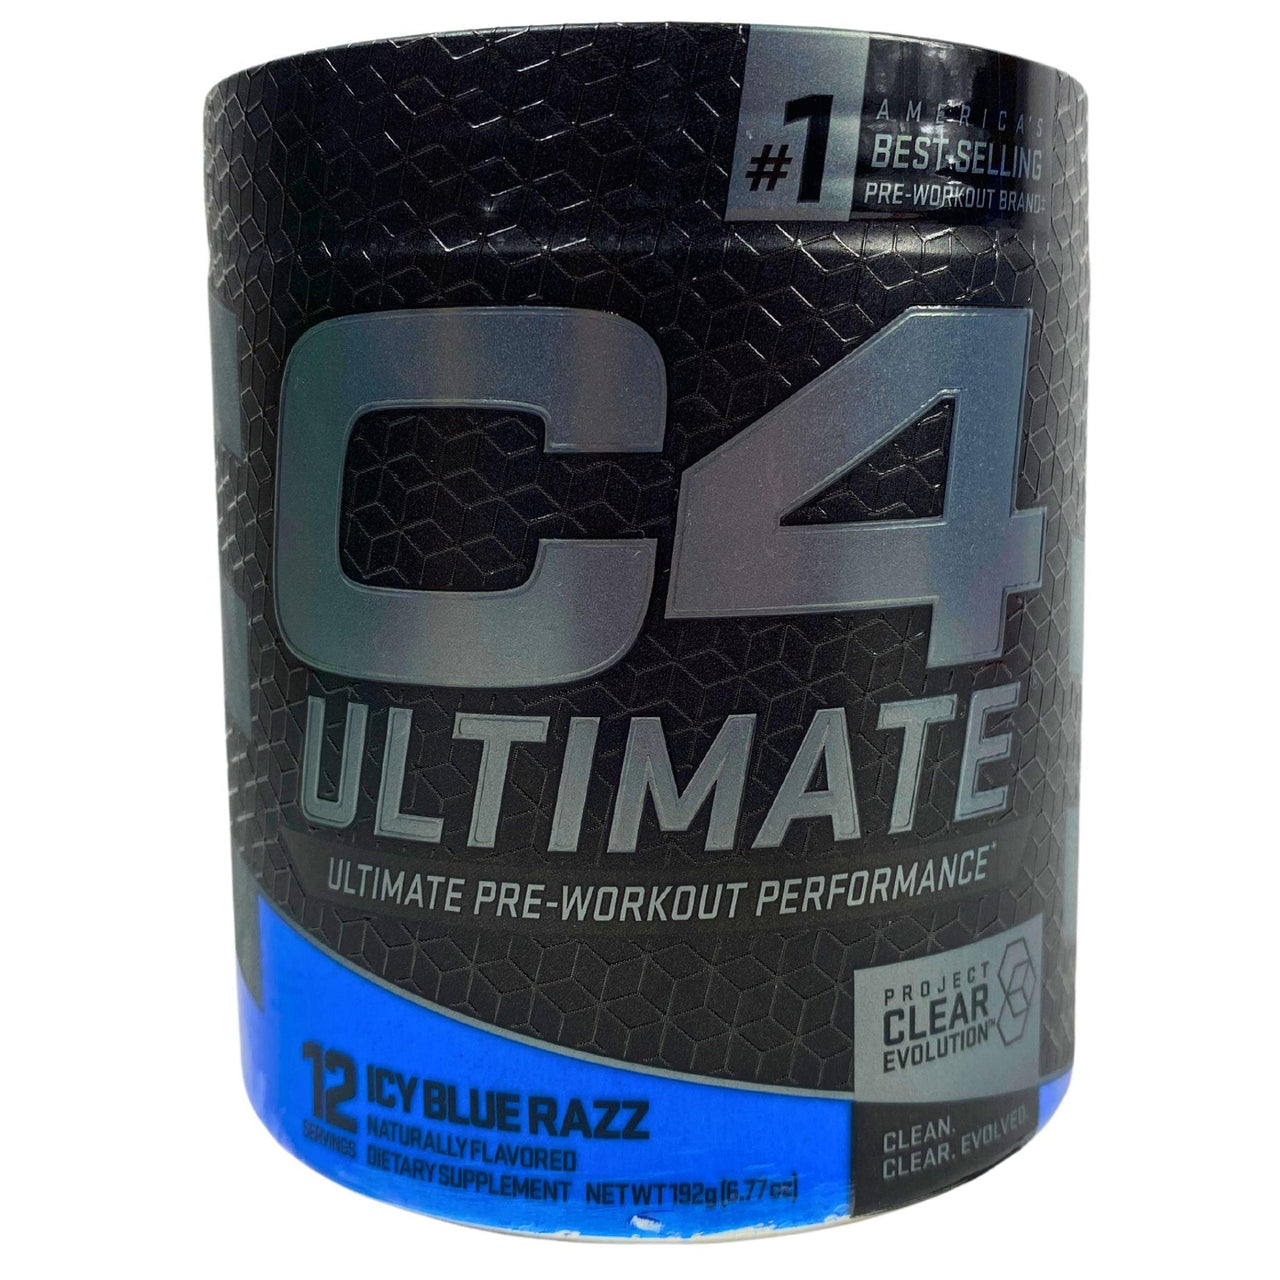 C4 Ultimate Pre-Workout Performance 12 servings of Icy Blue Razz Dietary Support 6.77OZ (40 Pcs Lot) - Discount Wholesalers Inc